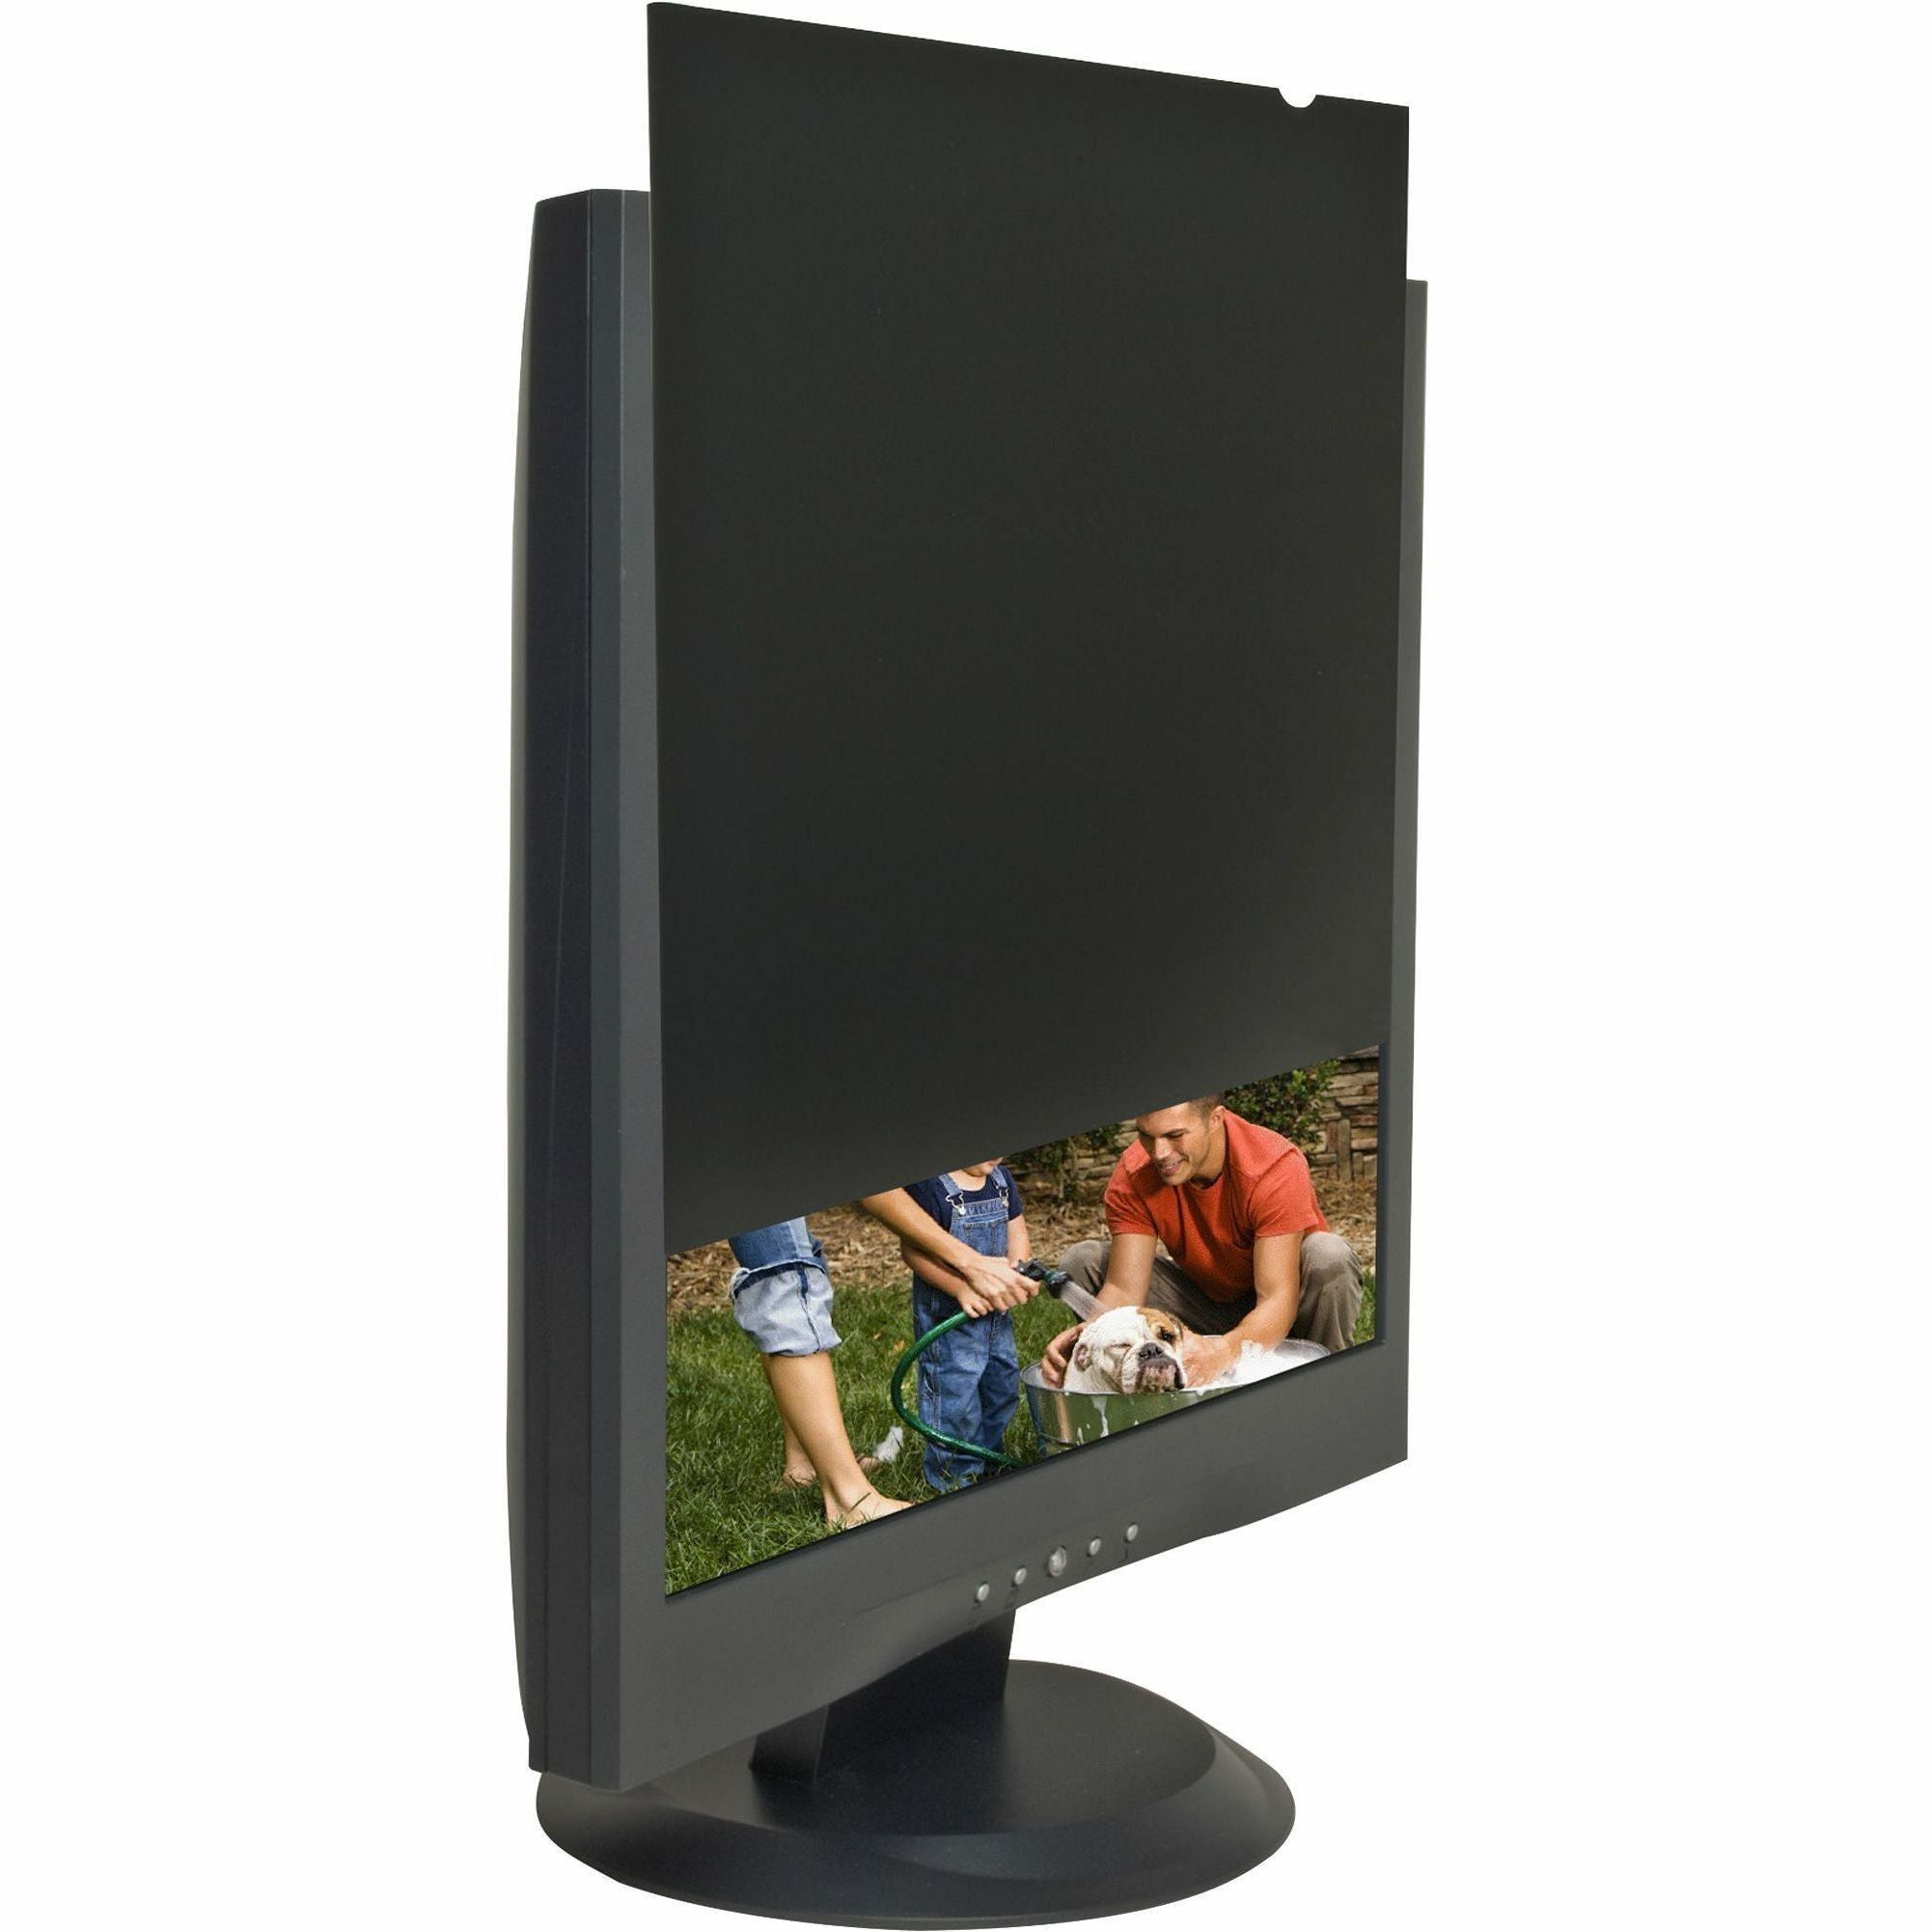 business-source-19-monitor-blackout-privacy-filter-black-for-19lcd-monitor-54-damage-resistant-anti-glare-1-pack_bsn20667 - 2